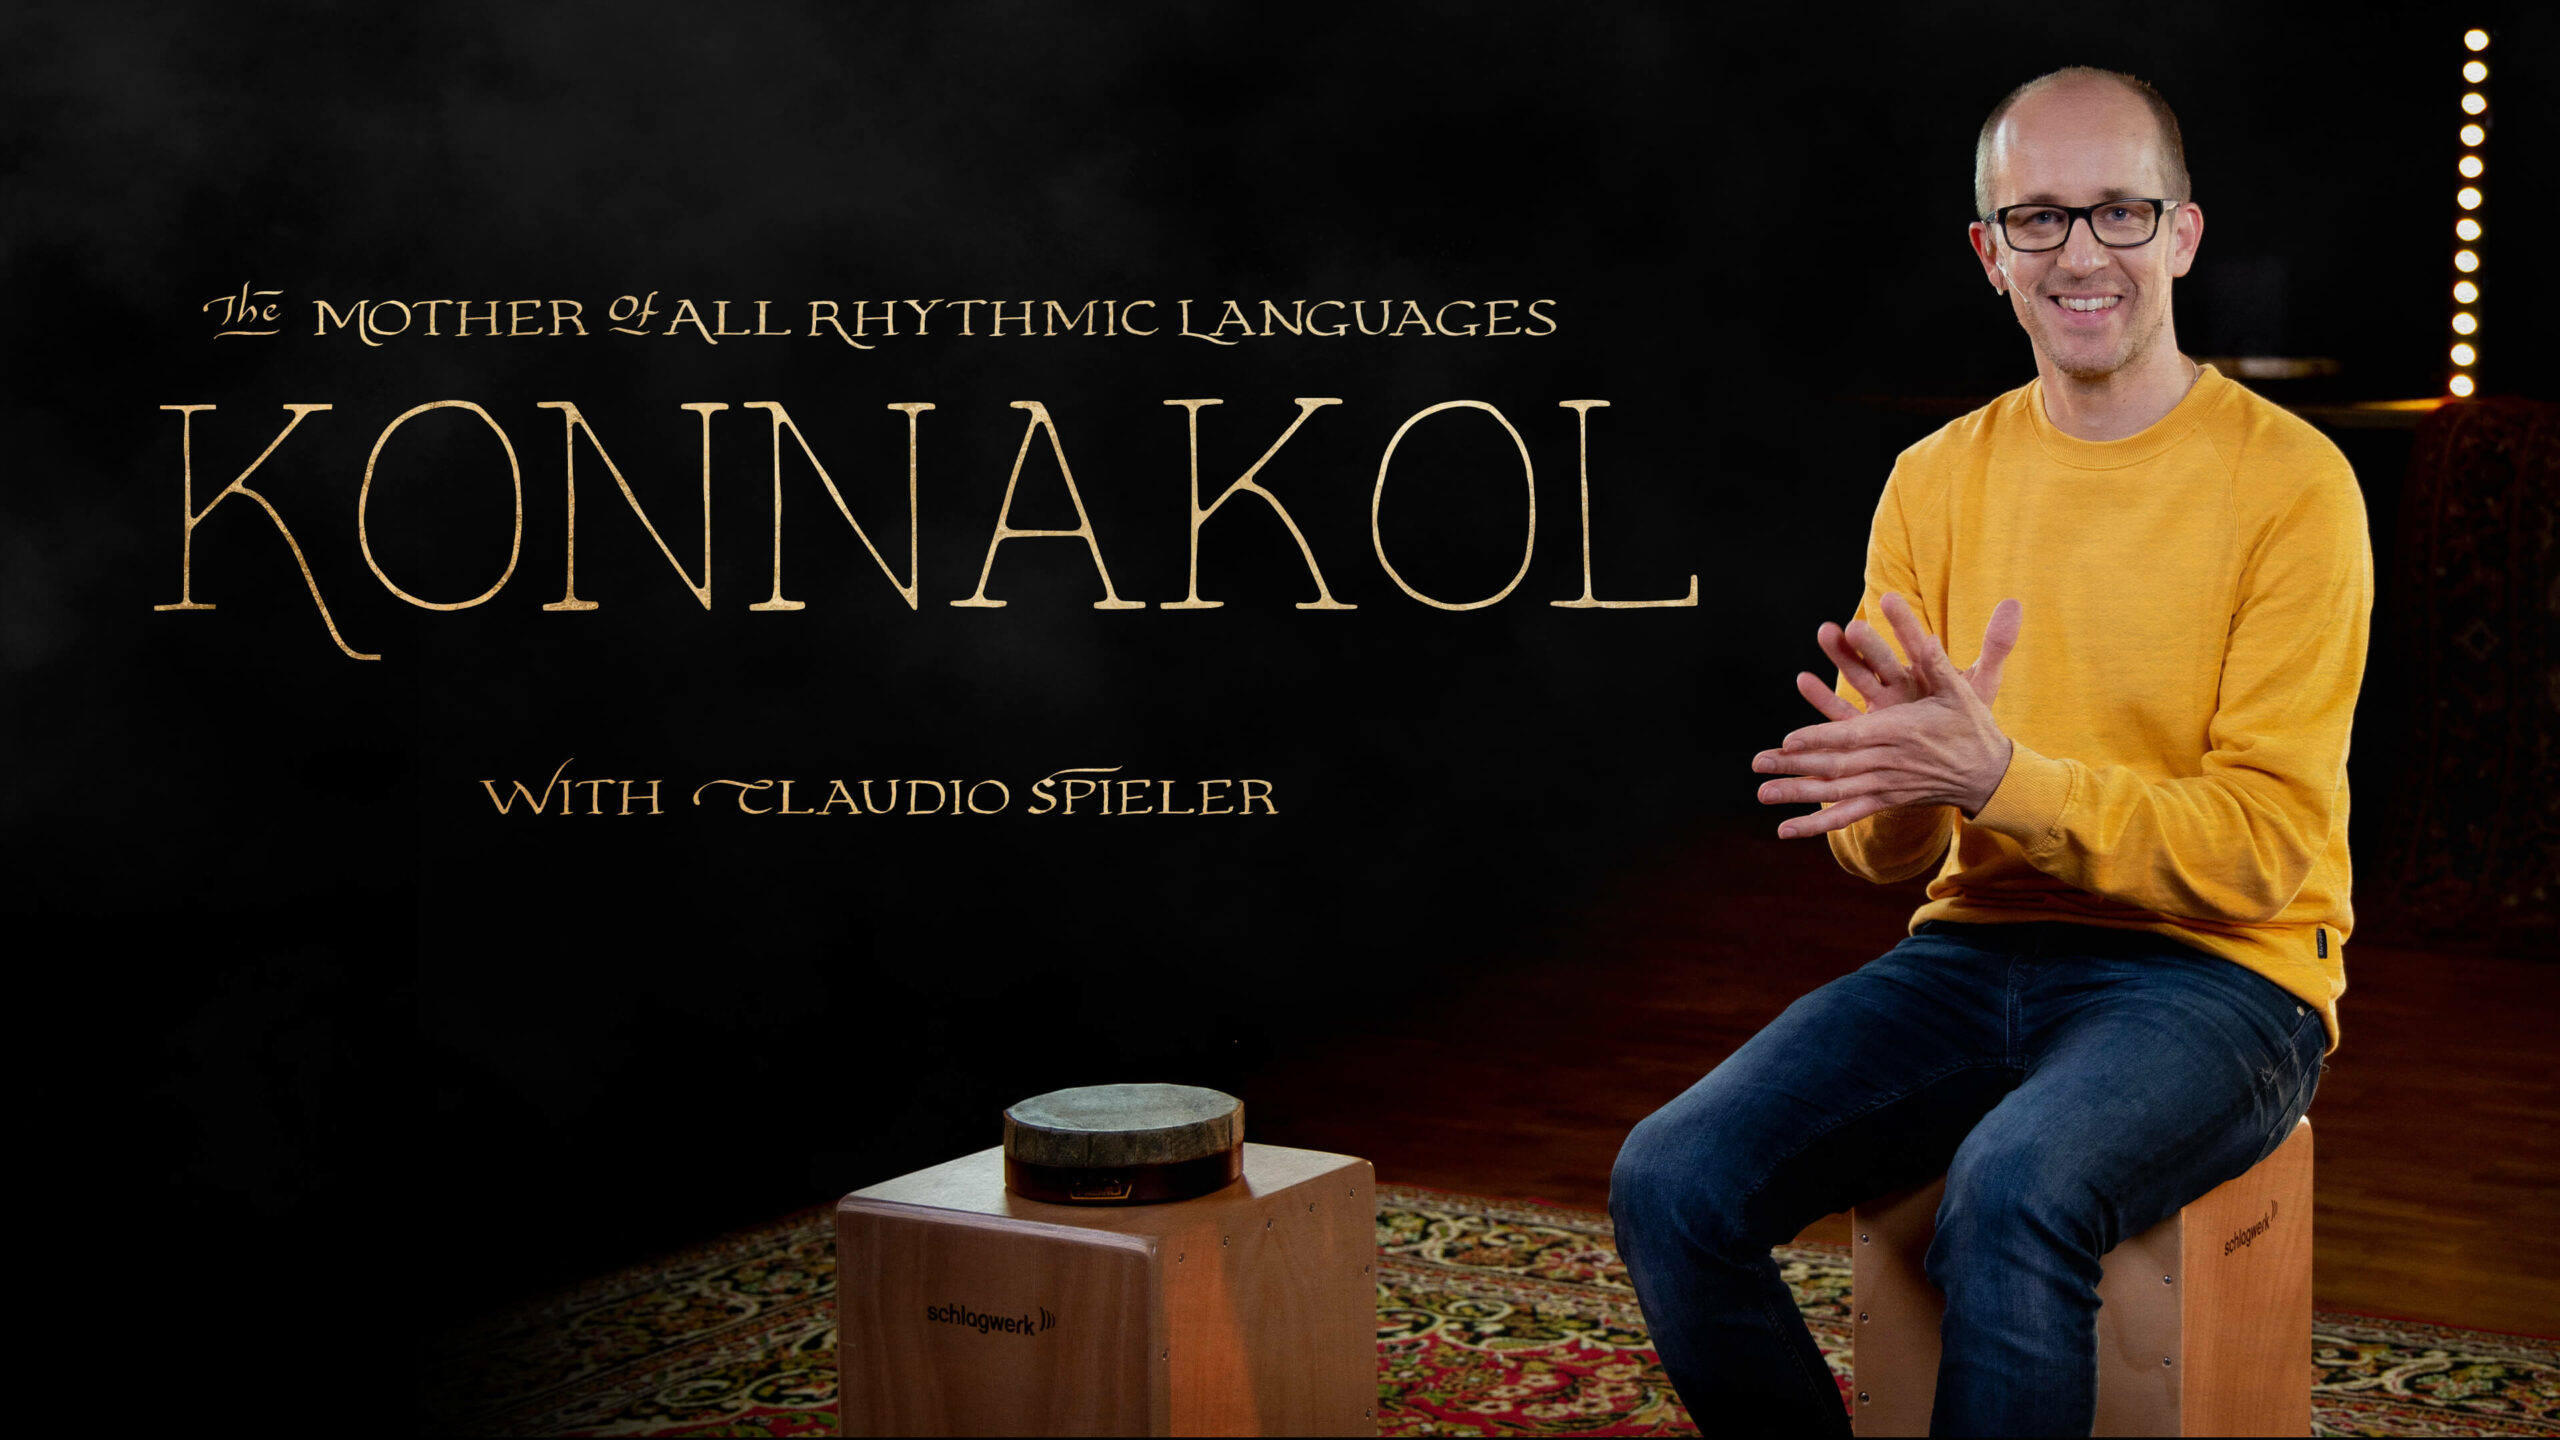 KRL the mother of all rhythmic languages konnakol with claudio spieler thumbnail 4k scaled